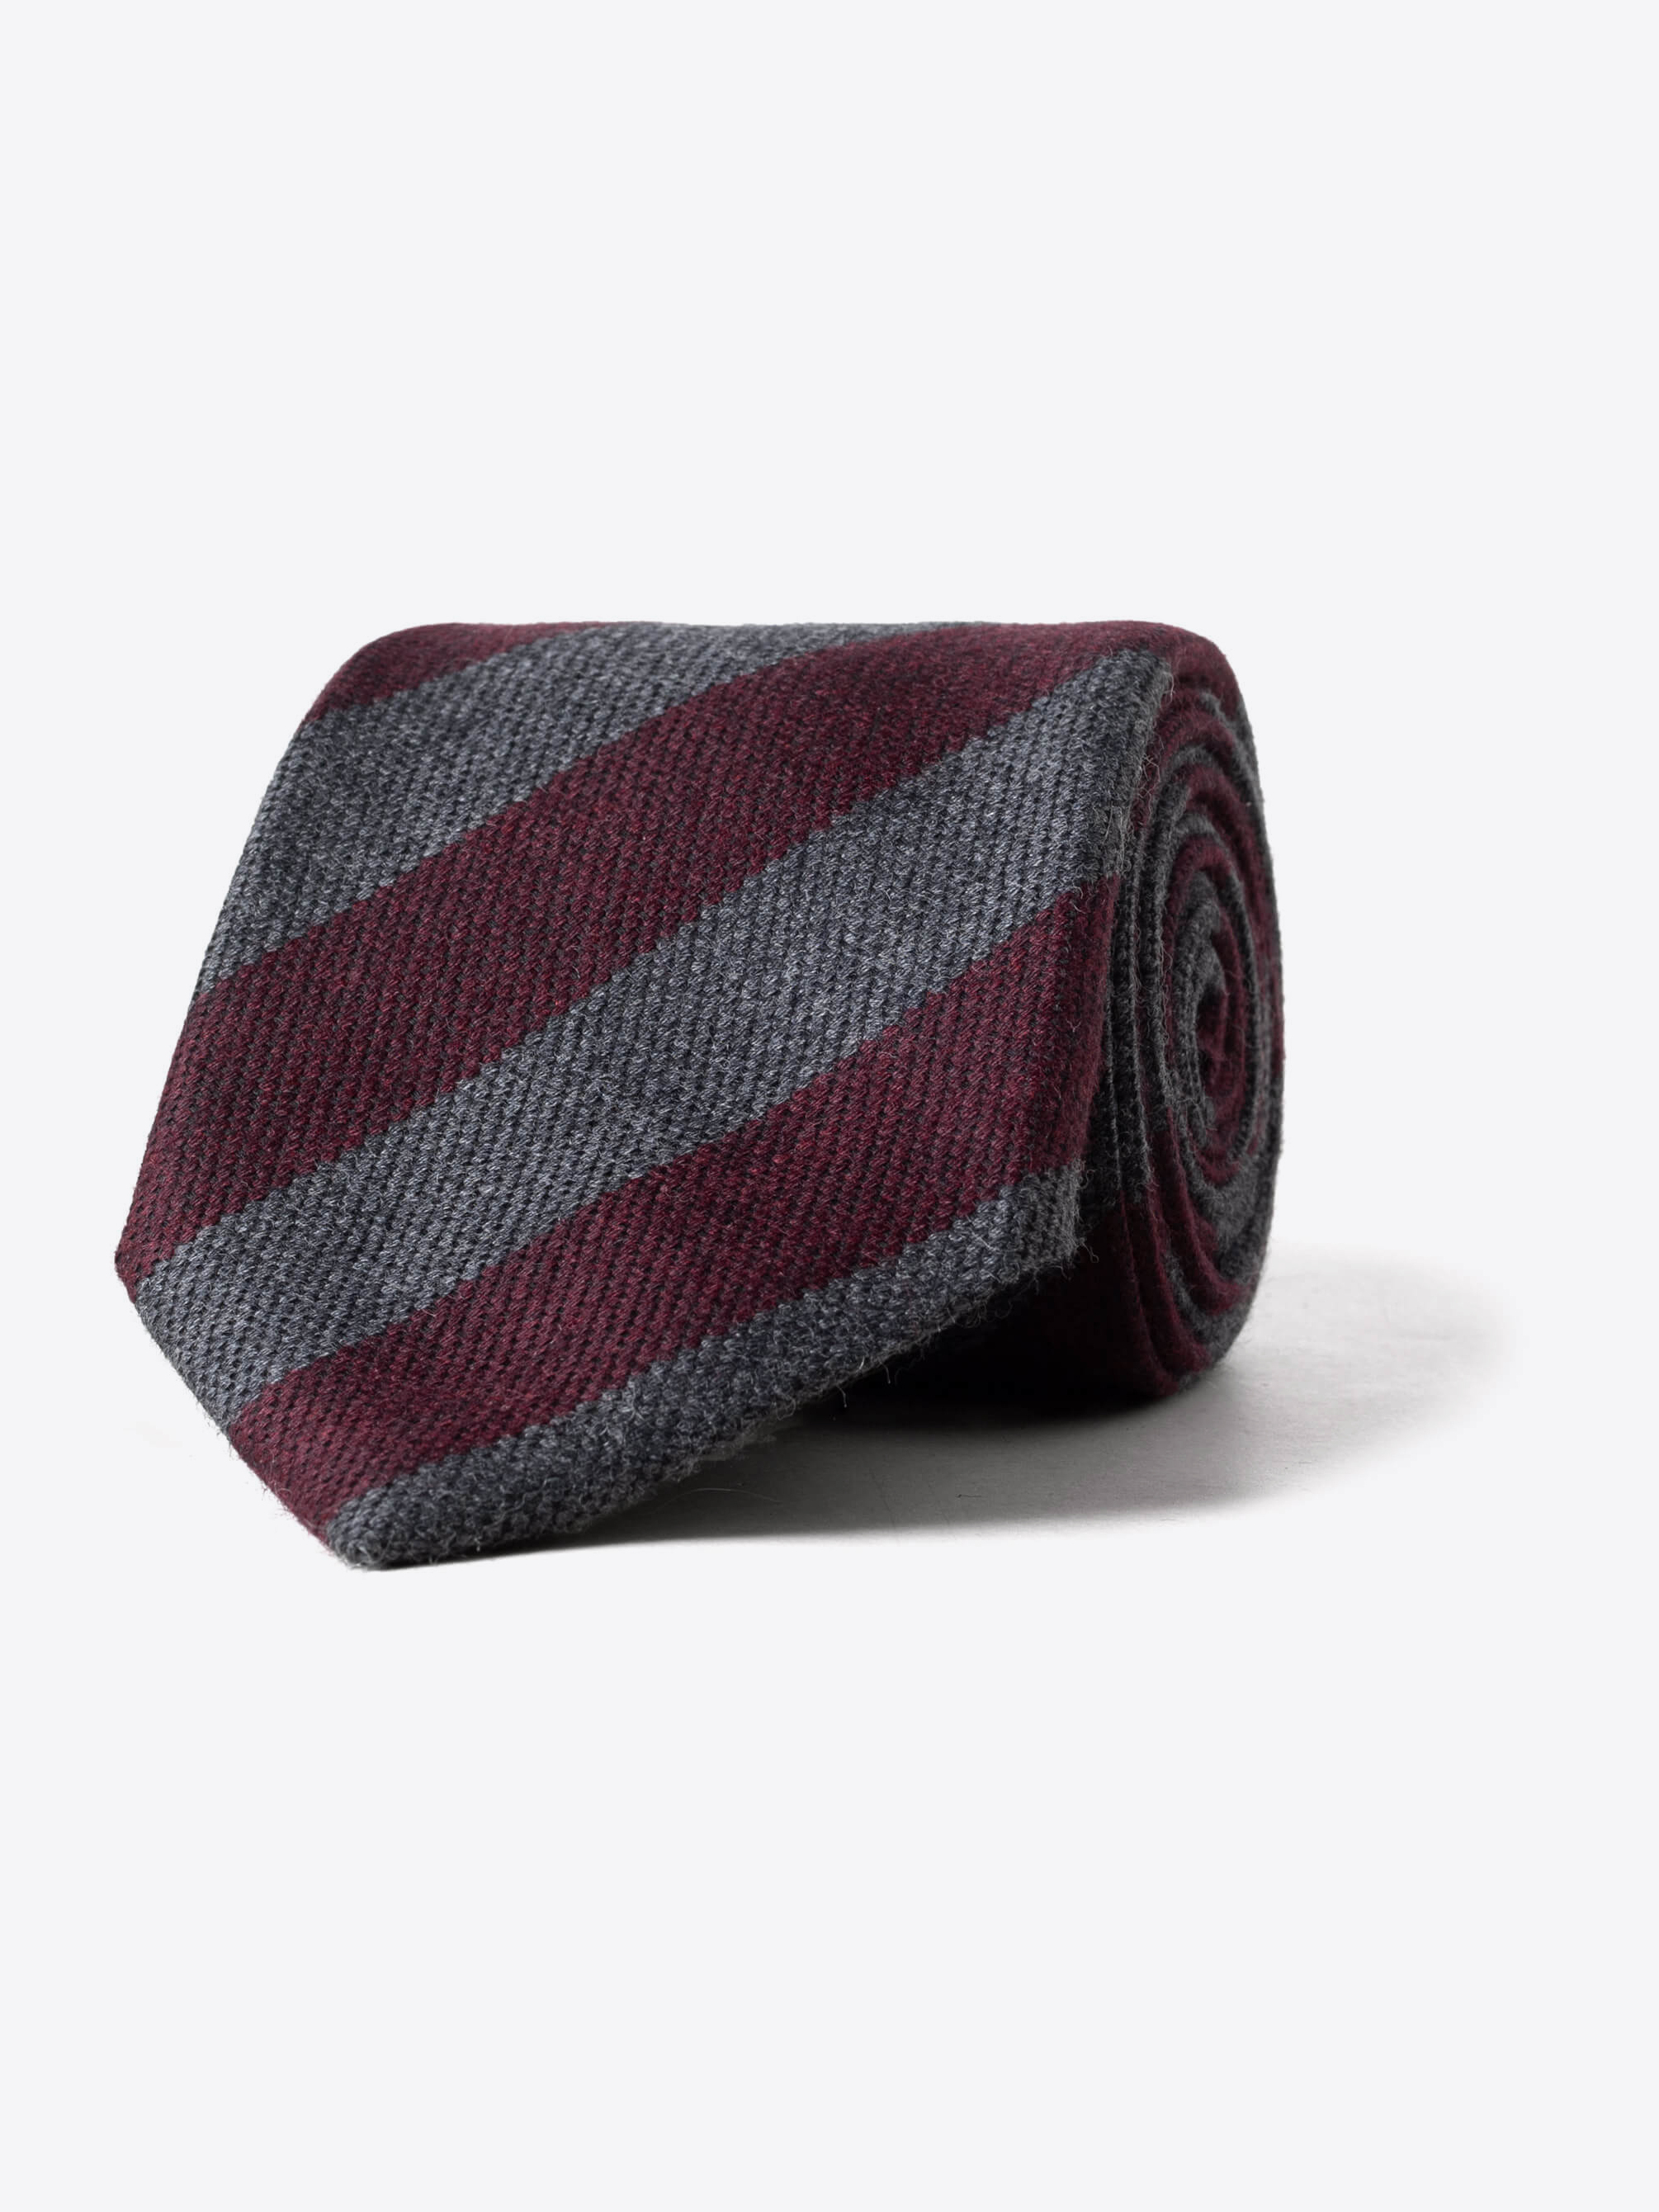 Zoom Image of Burgundy and Grey Striped Wool and Silk Tie